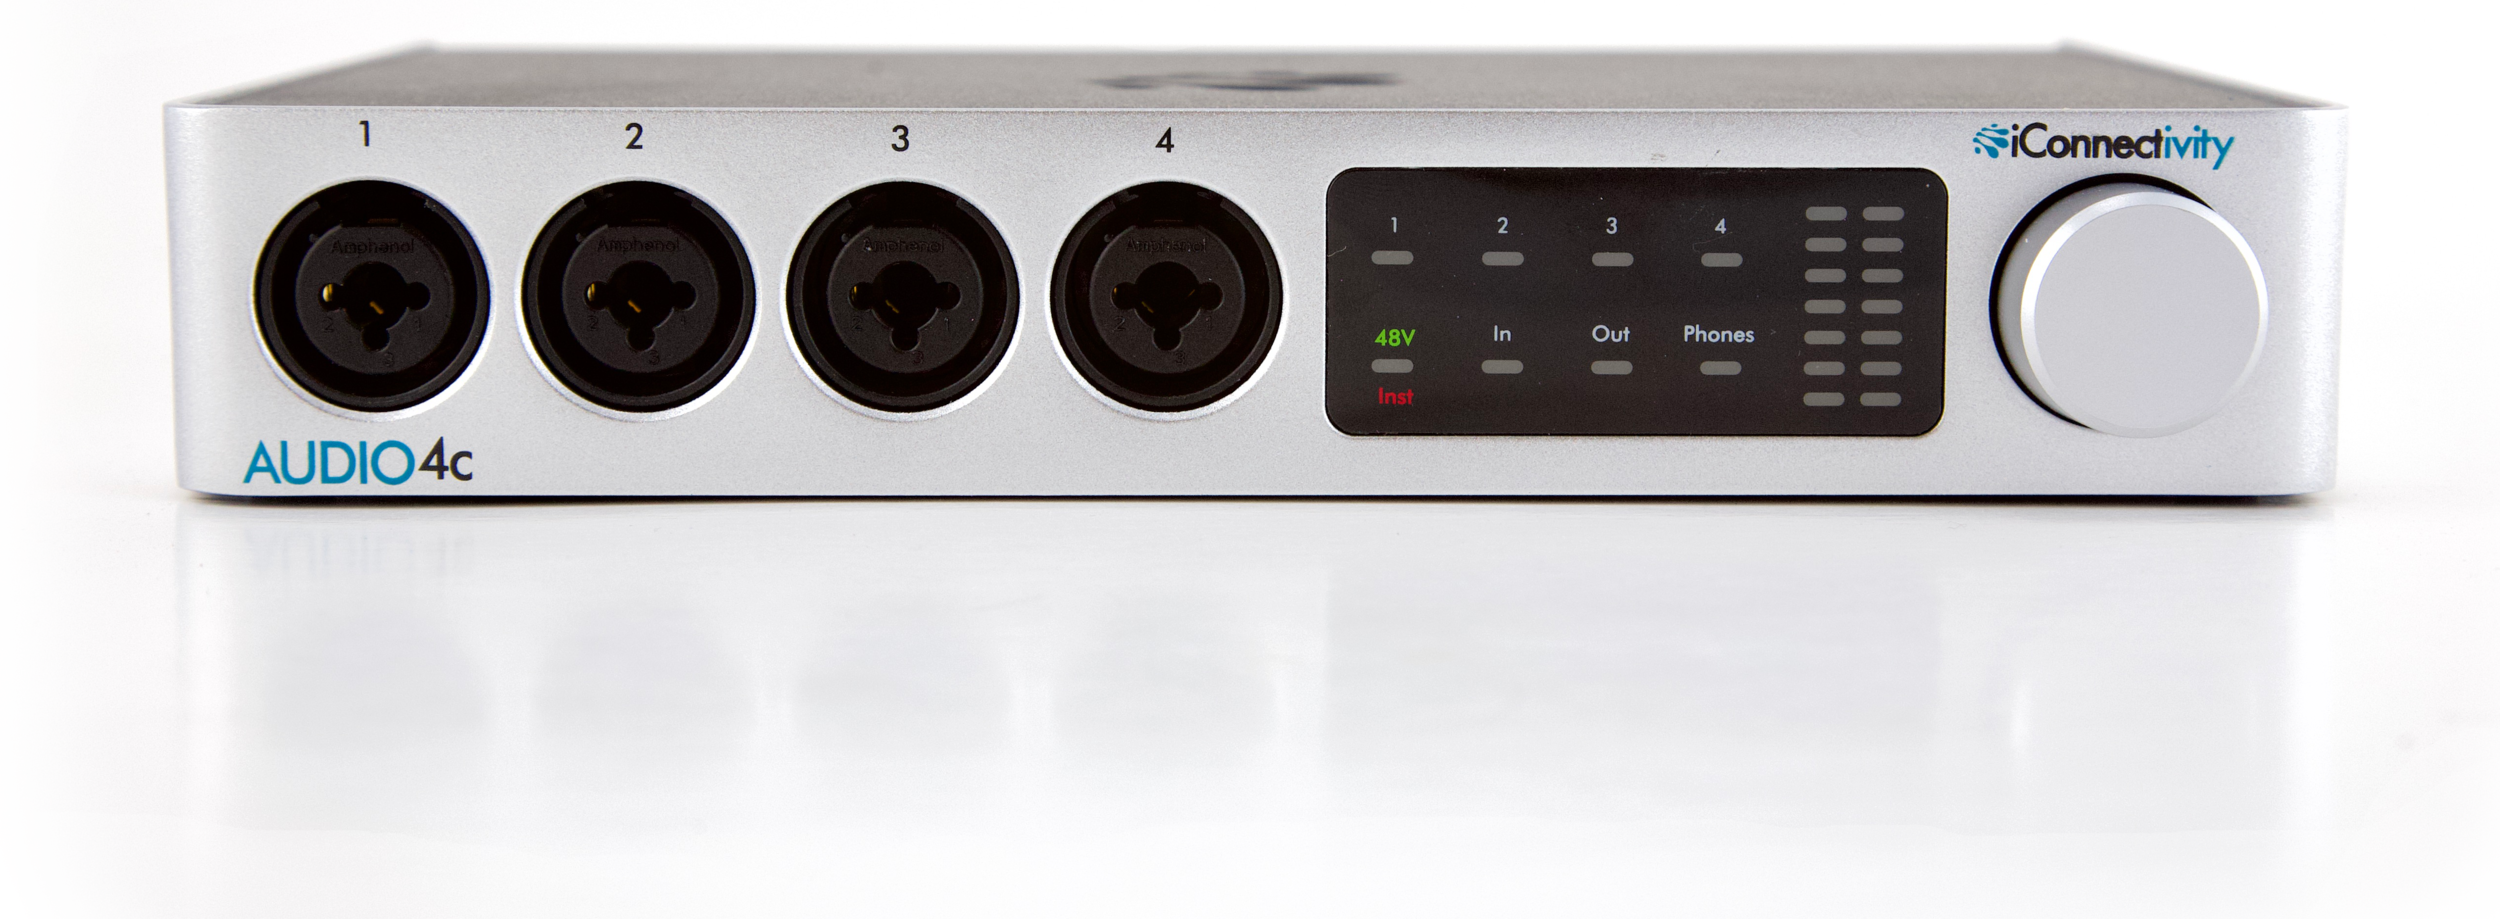 AUDIO4c - audio interface for streaming, performance, and 